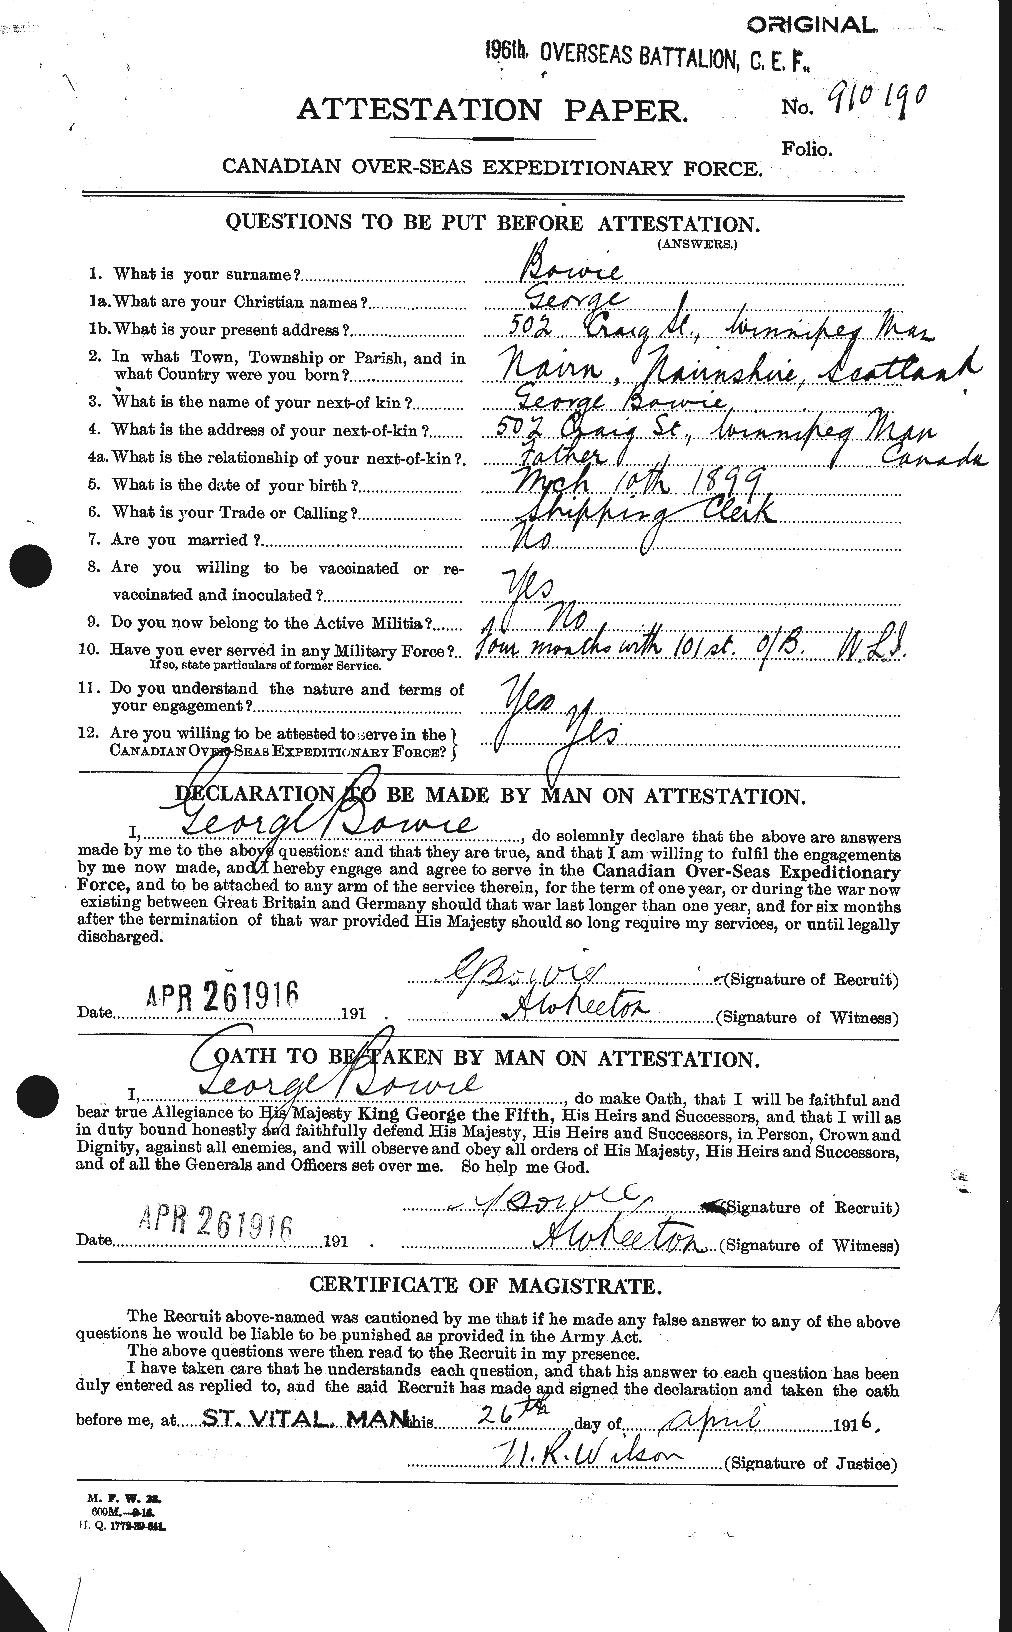 Personnel Records of the First World War - CEF 253711a